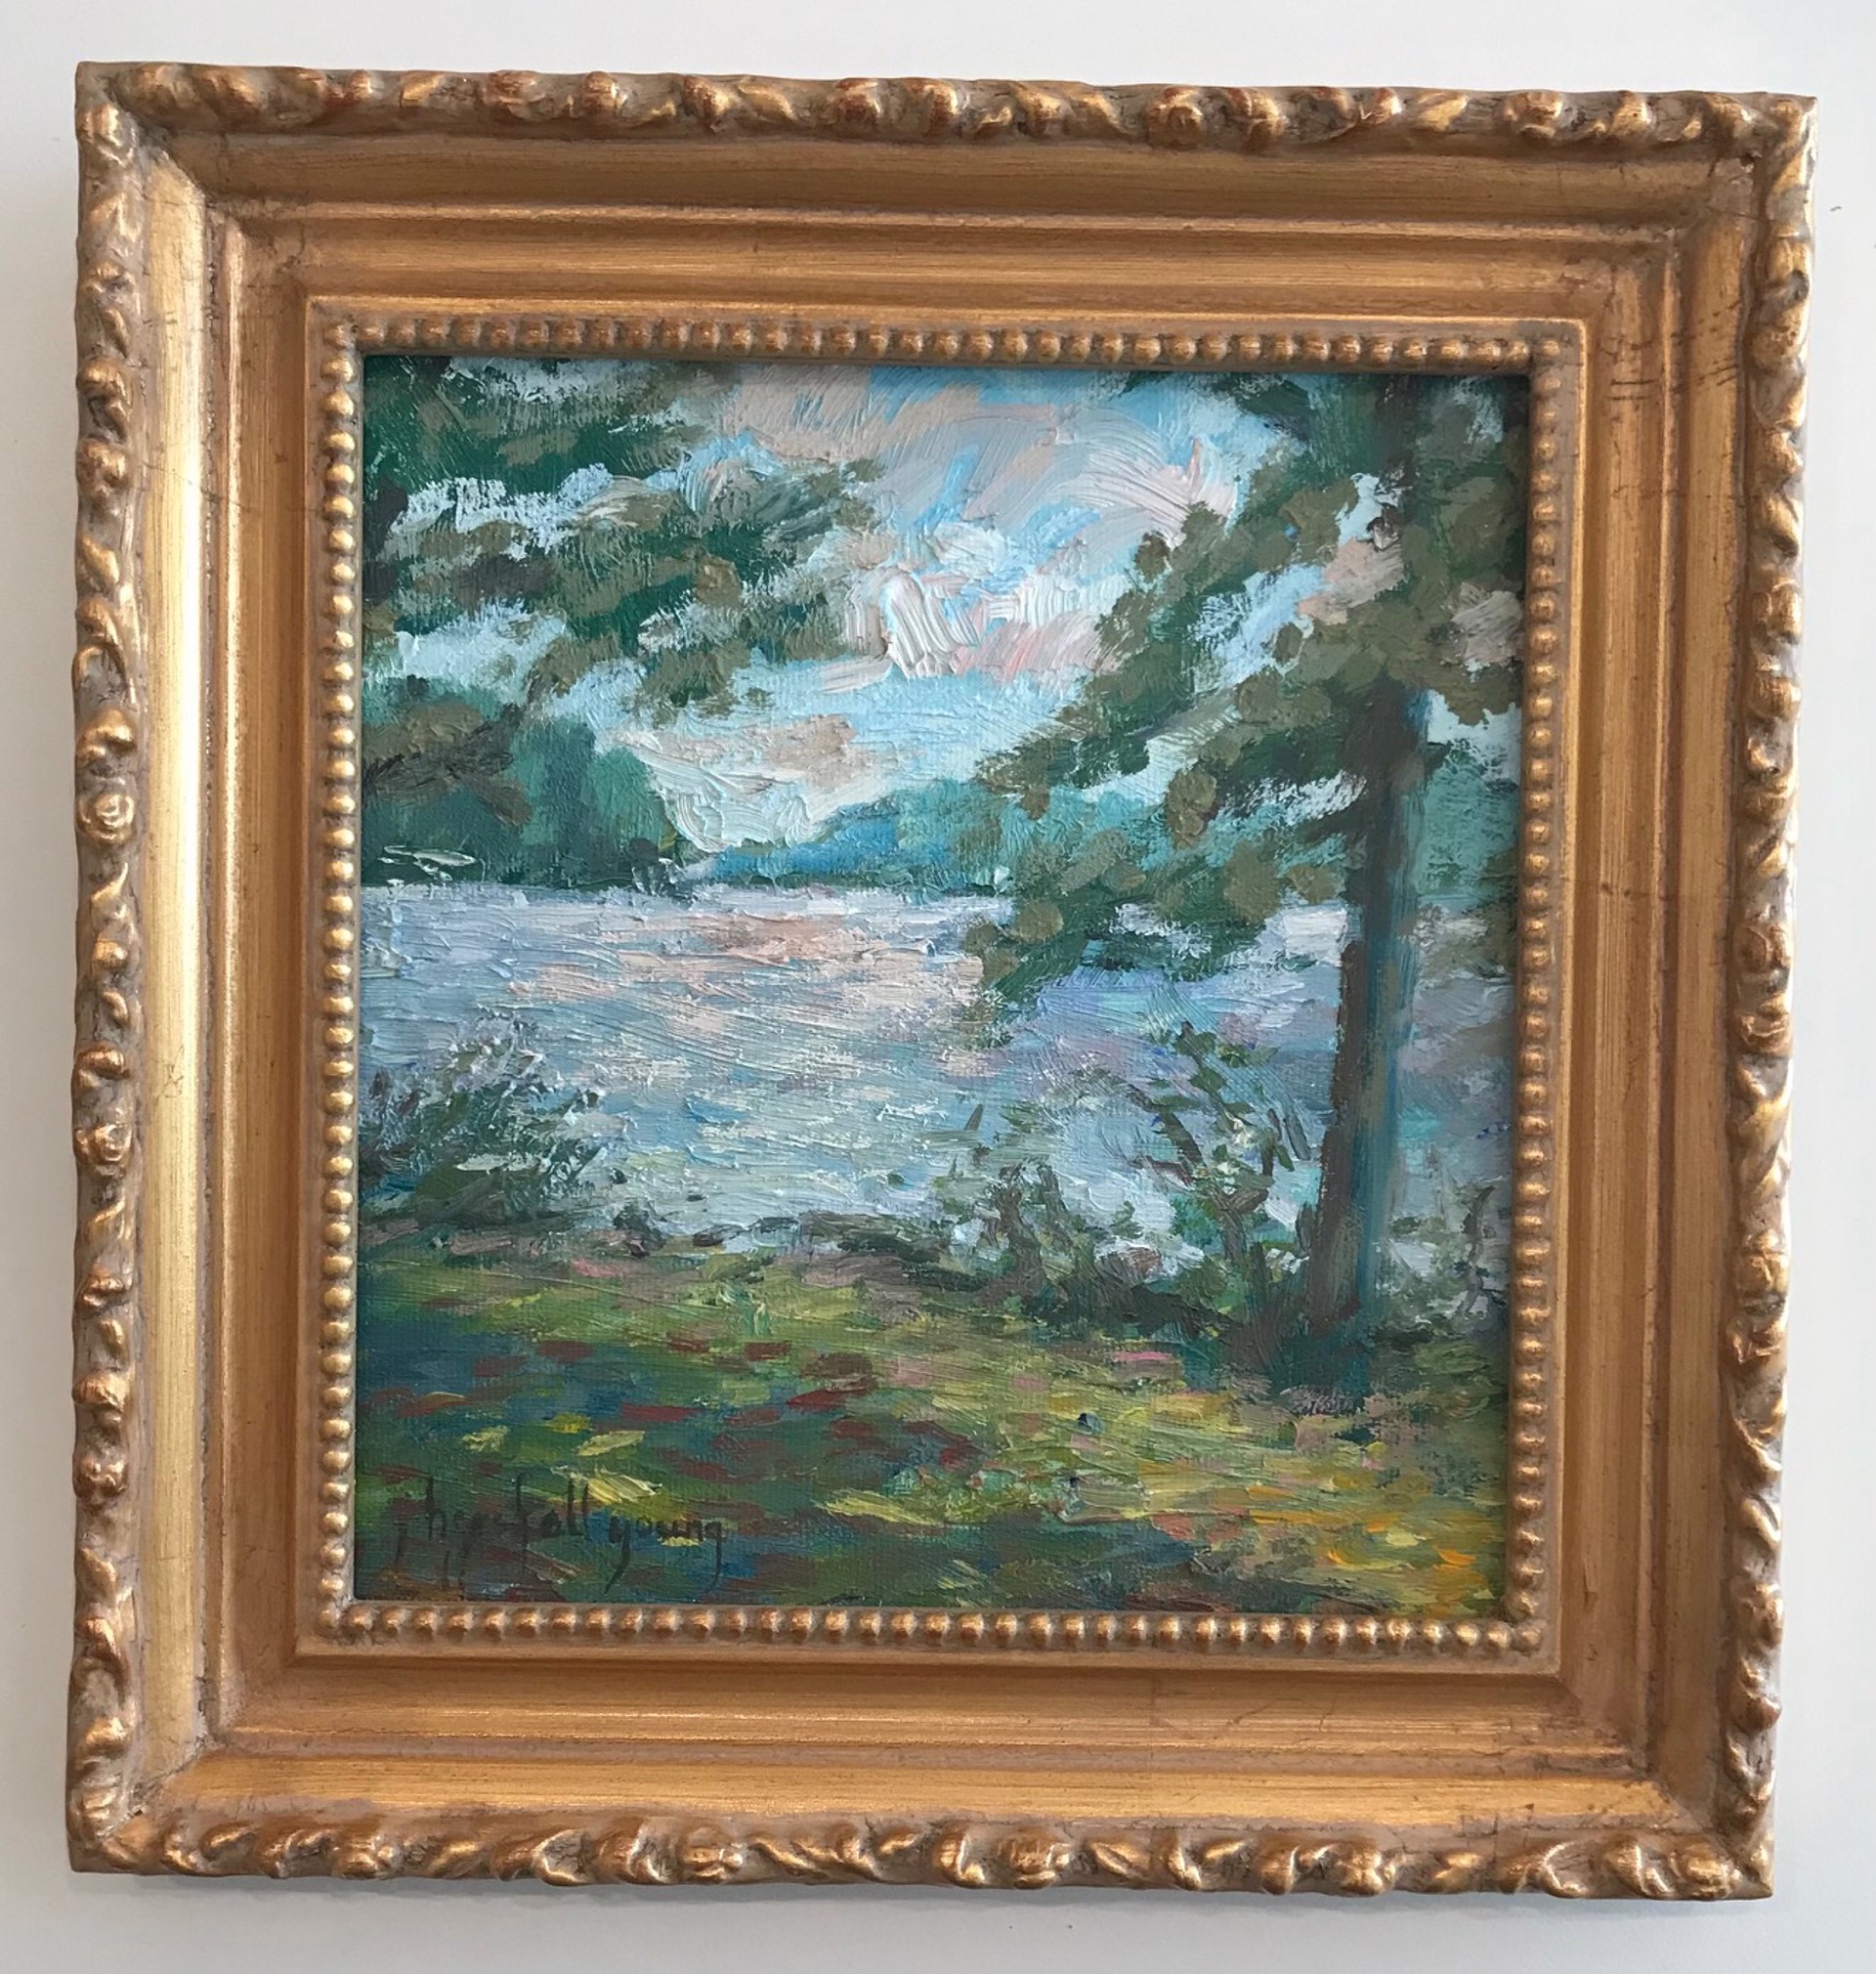 View of the Lake (L380) by Joan Horsfall Young